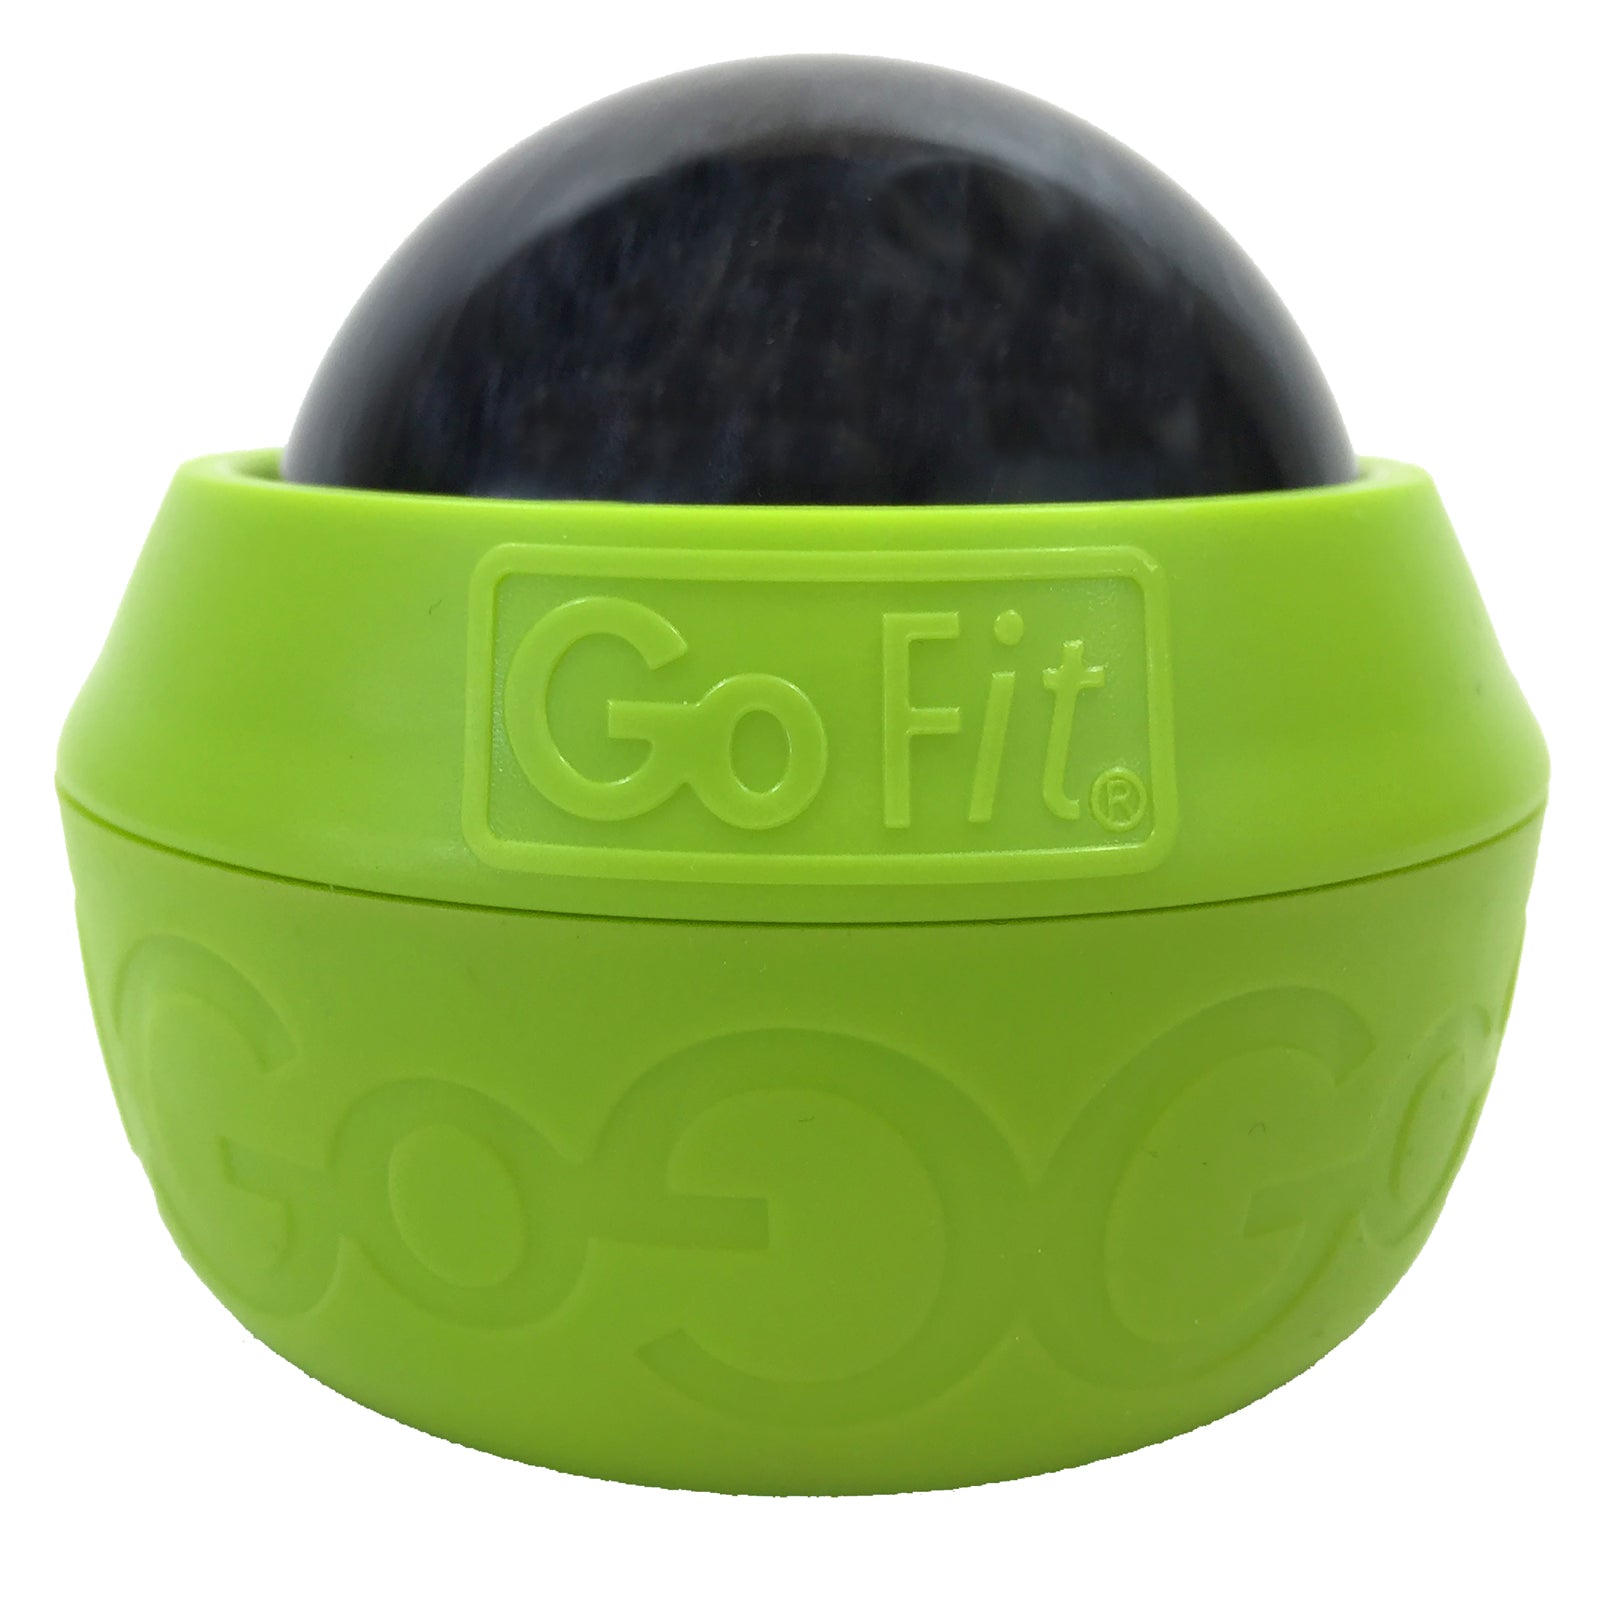 GoFit 12 Barrel Roller and Omron TENS Device - 20435695